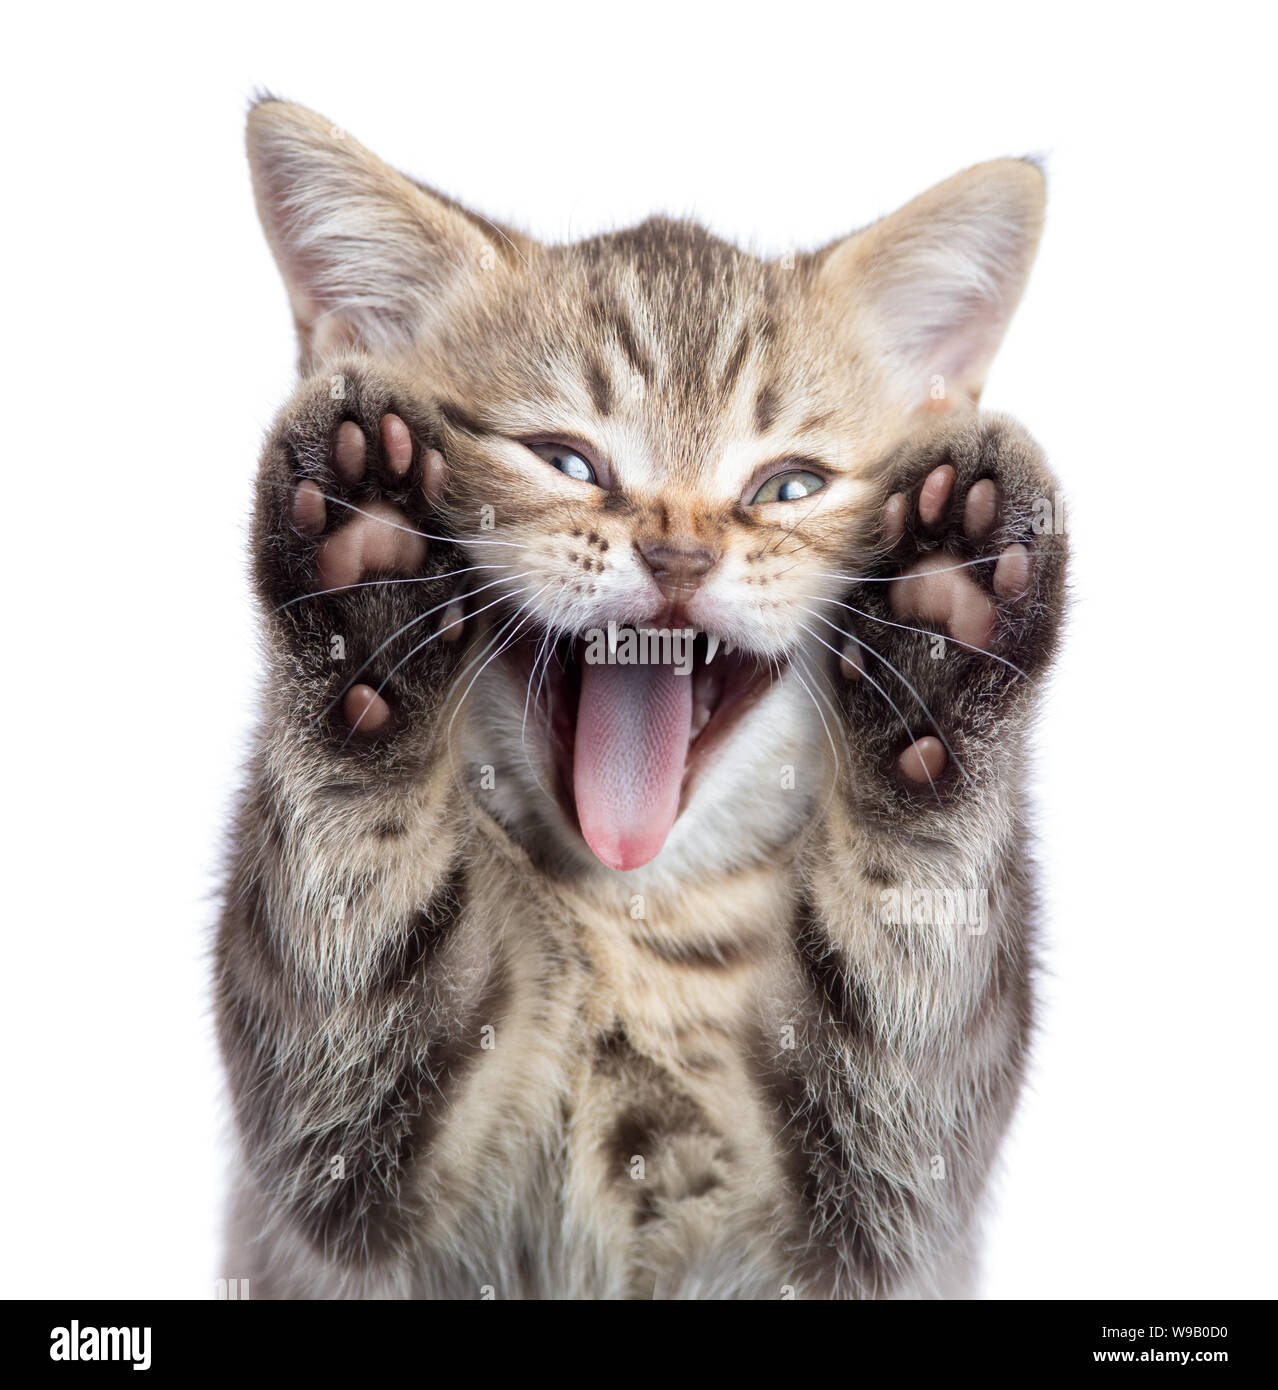 Funny kitten cat portrait with open mouth and two paws uoisolated Stock Photo